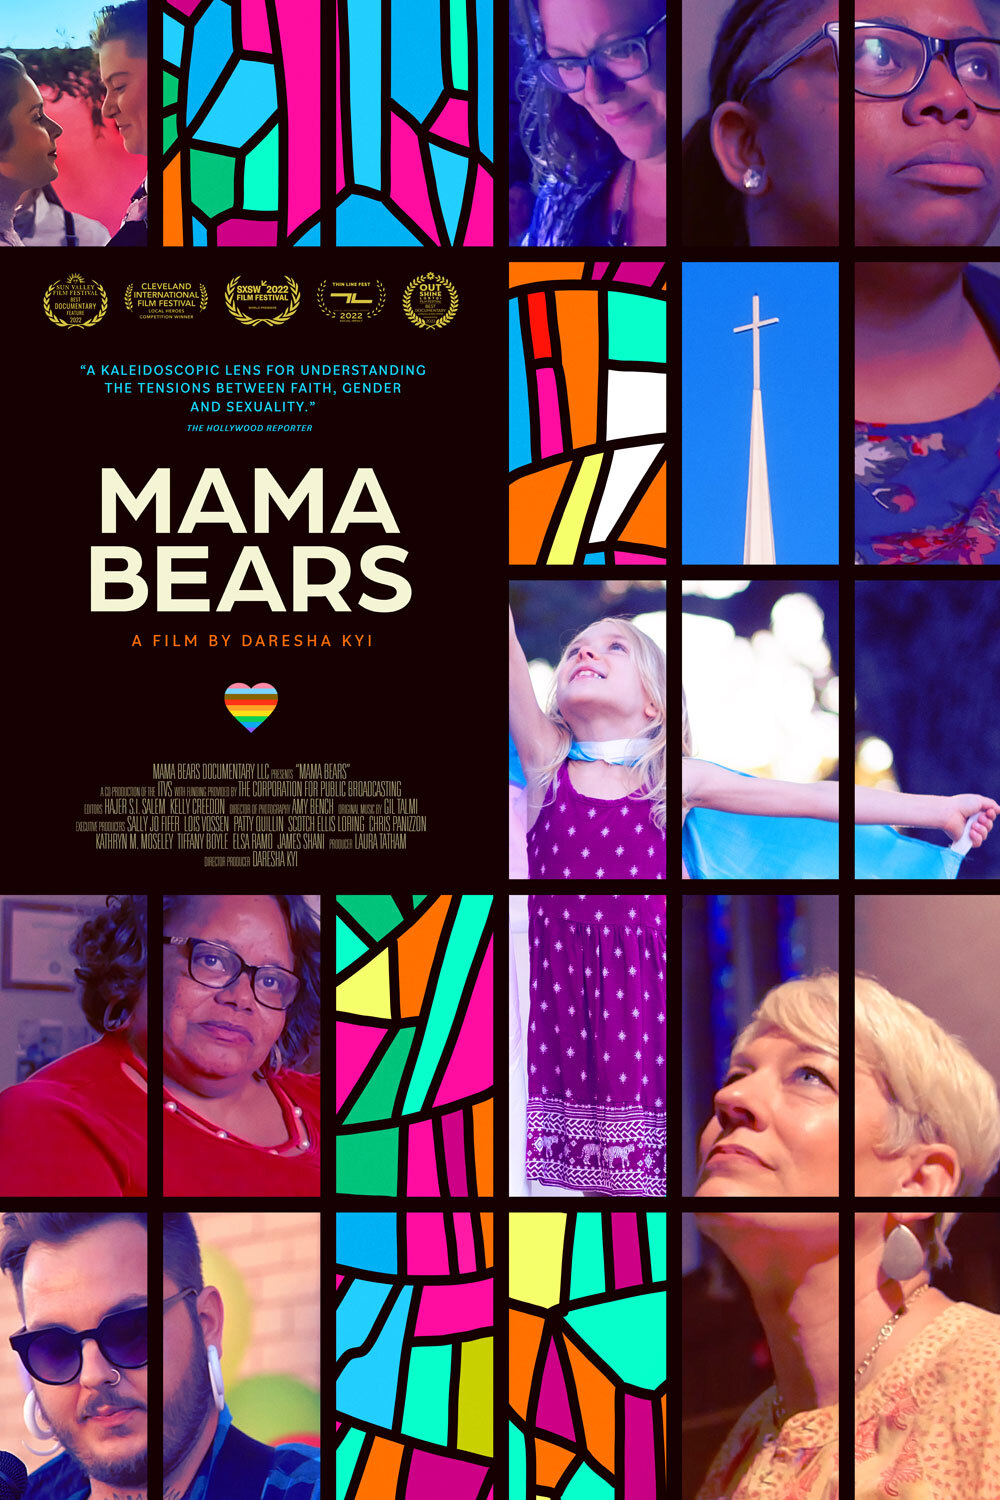 Movie poster for Mama Bears, collage of characters and mosaic